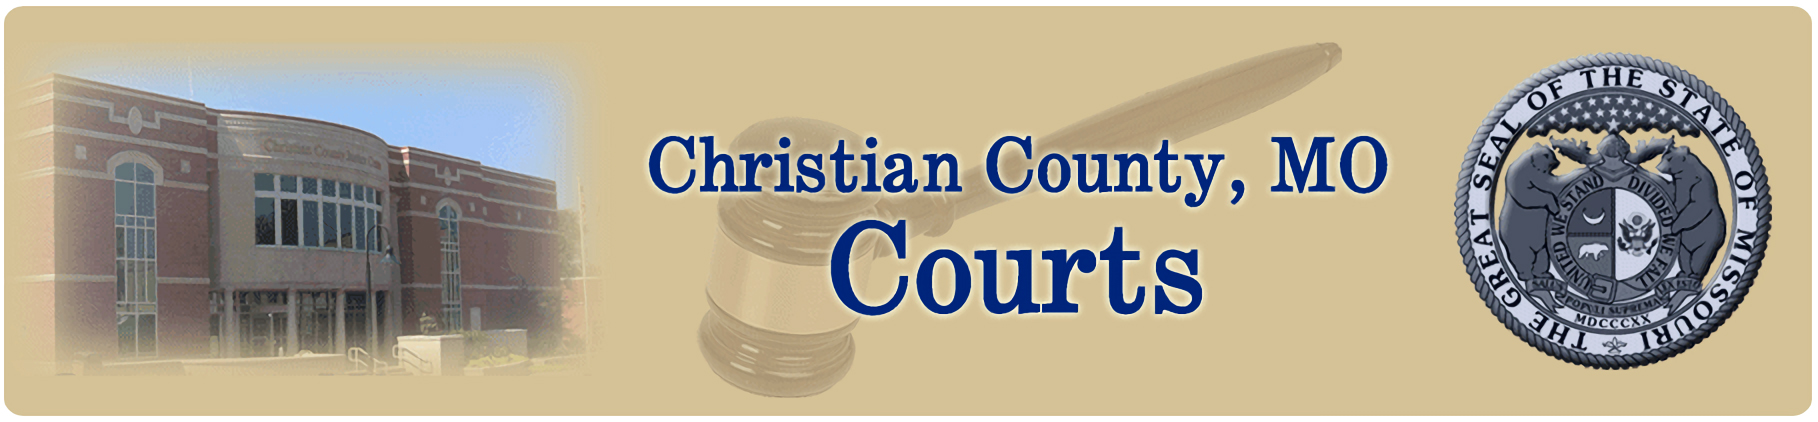 Christian County, MO Courts